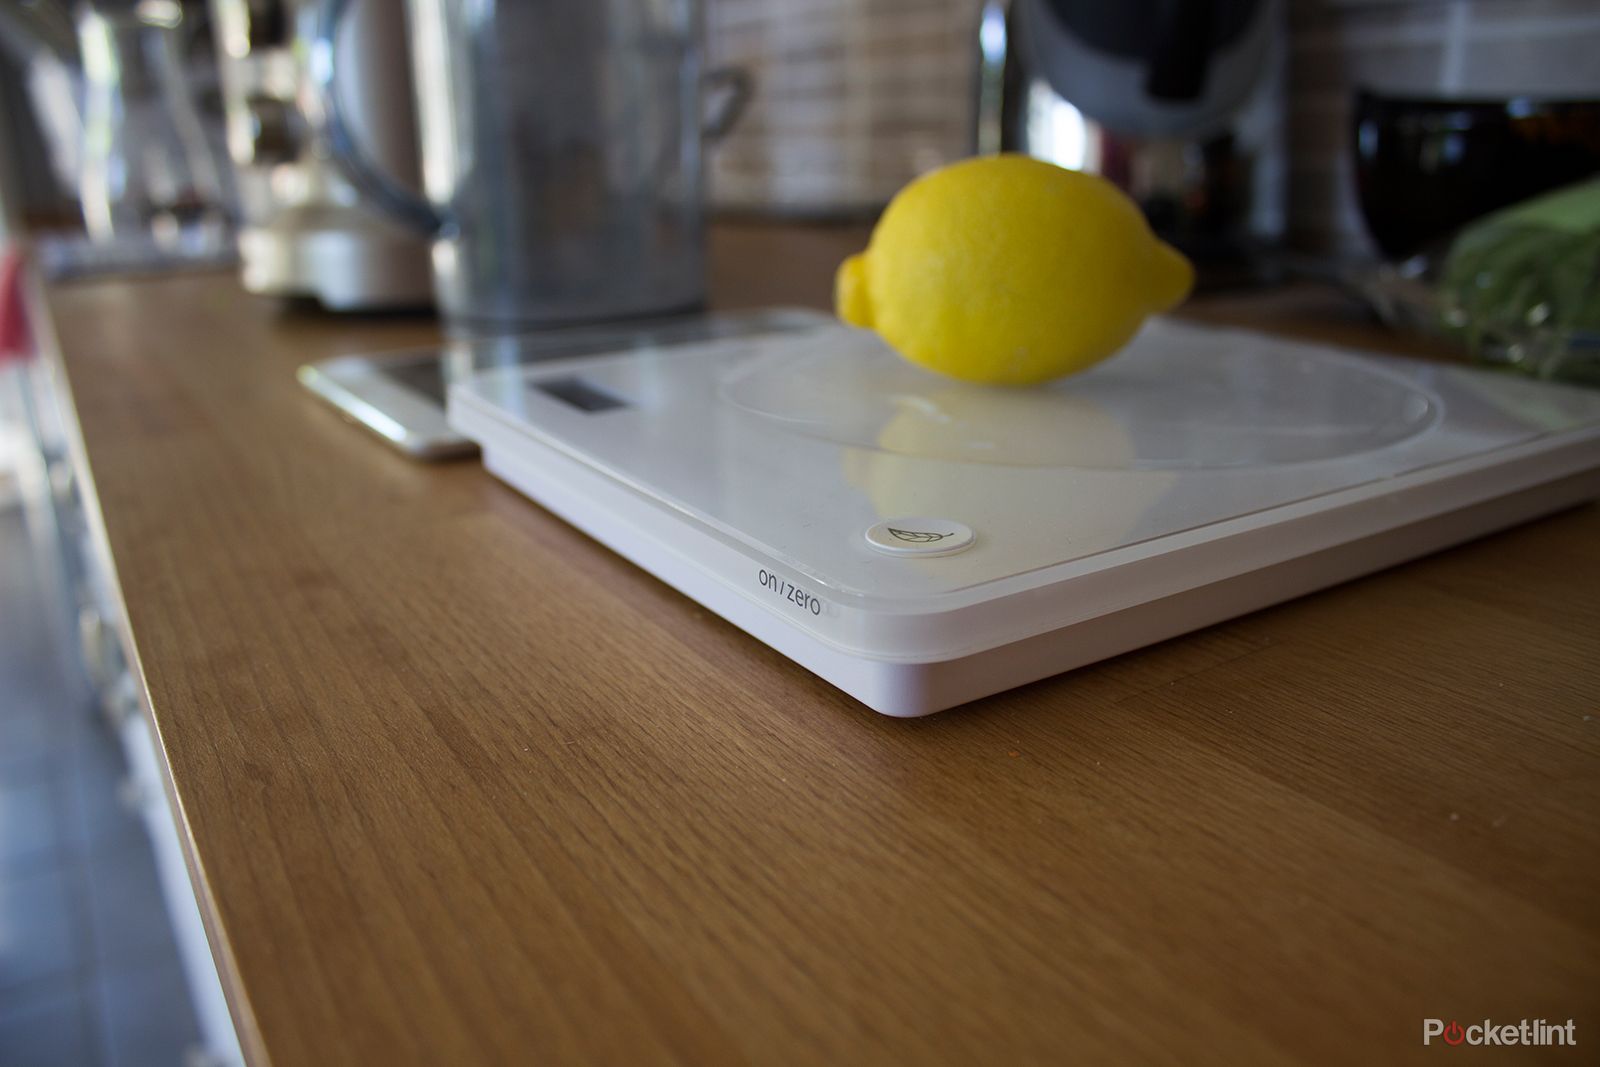 calorie counting just got easy situ smart scale even tracks vitamin intake image 1